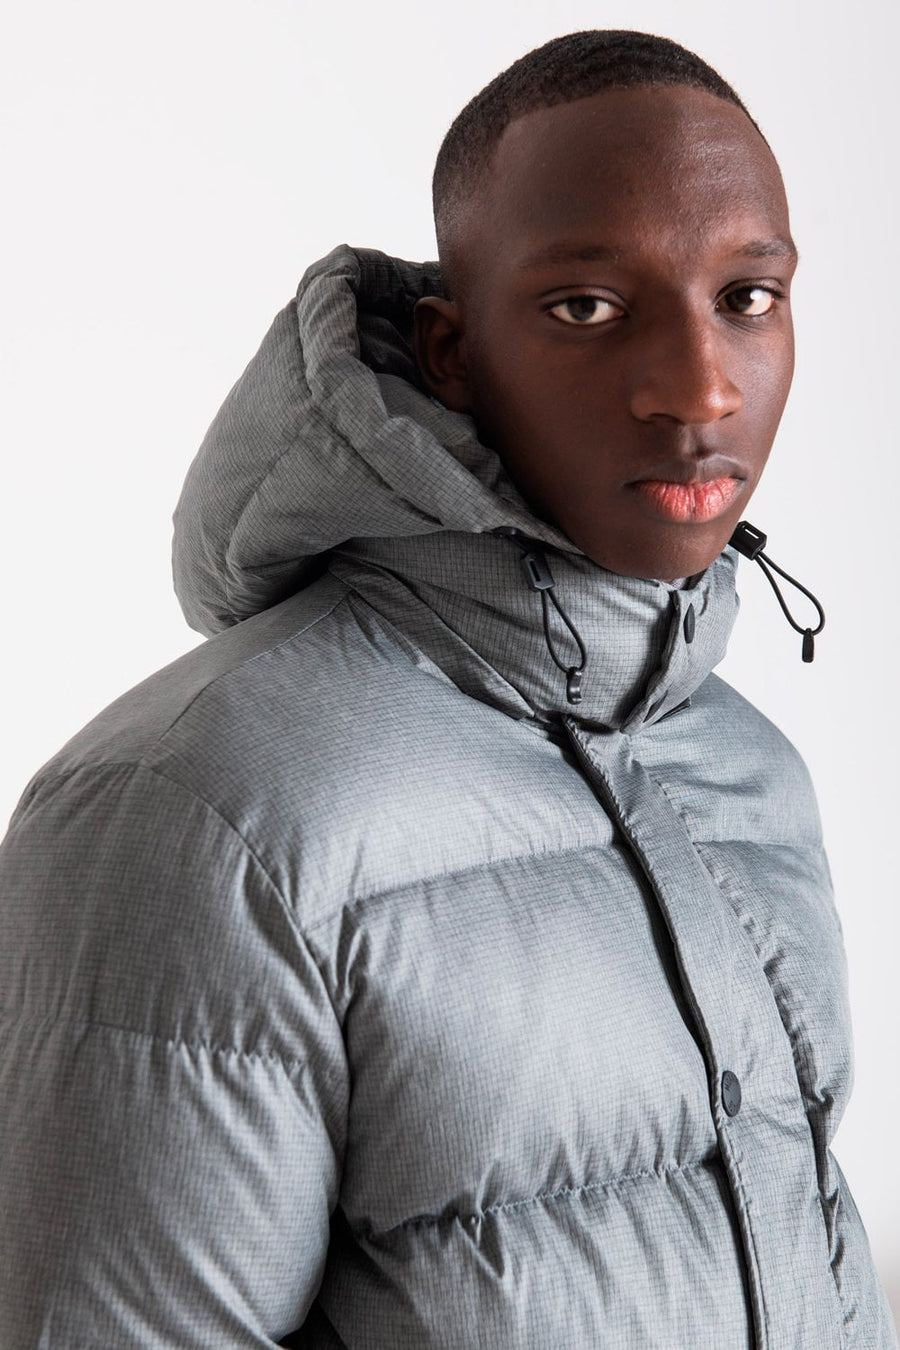 Buy the Antony Morato Padded Tech Hood Jacket in Grey at Intro. Spend £50 for free UK delivery. Official stockists. We ship worldwide.